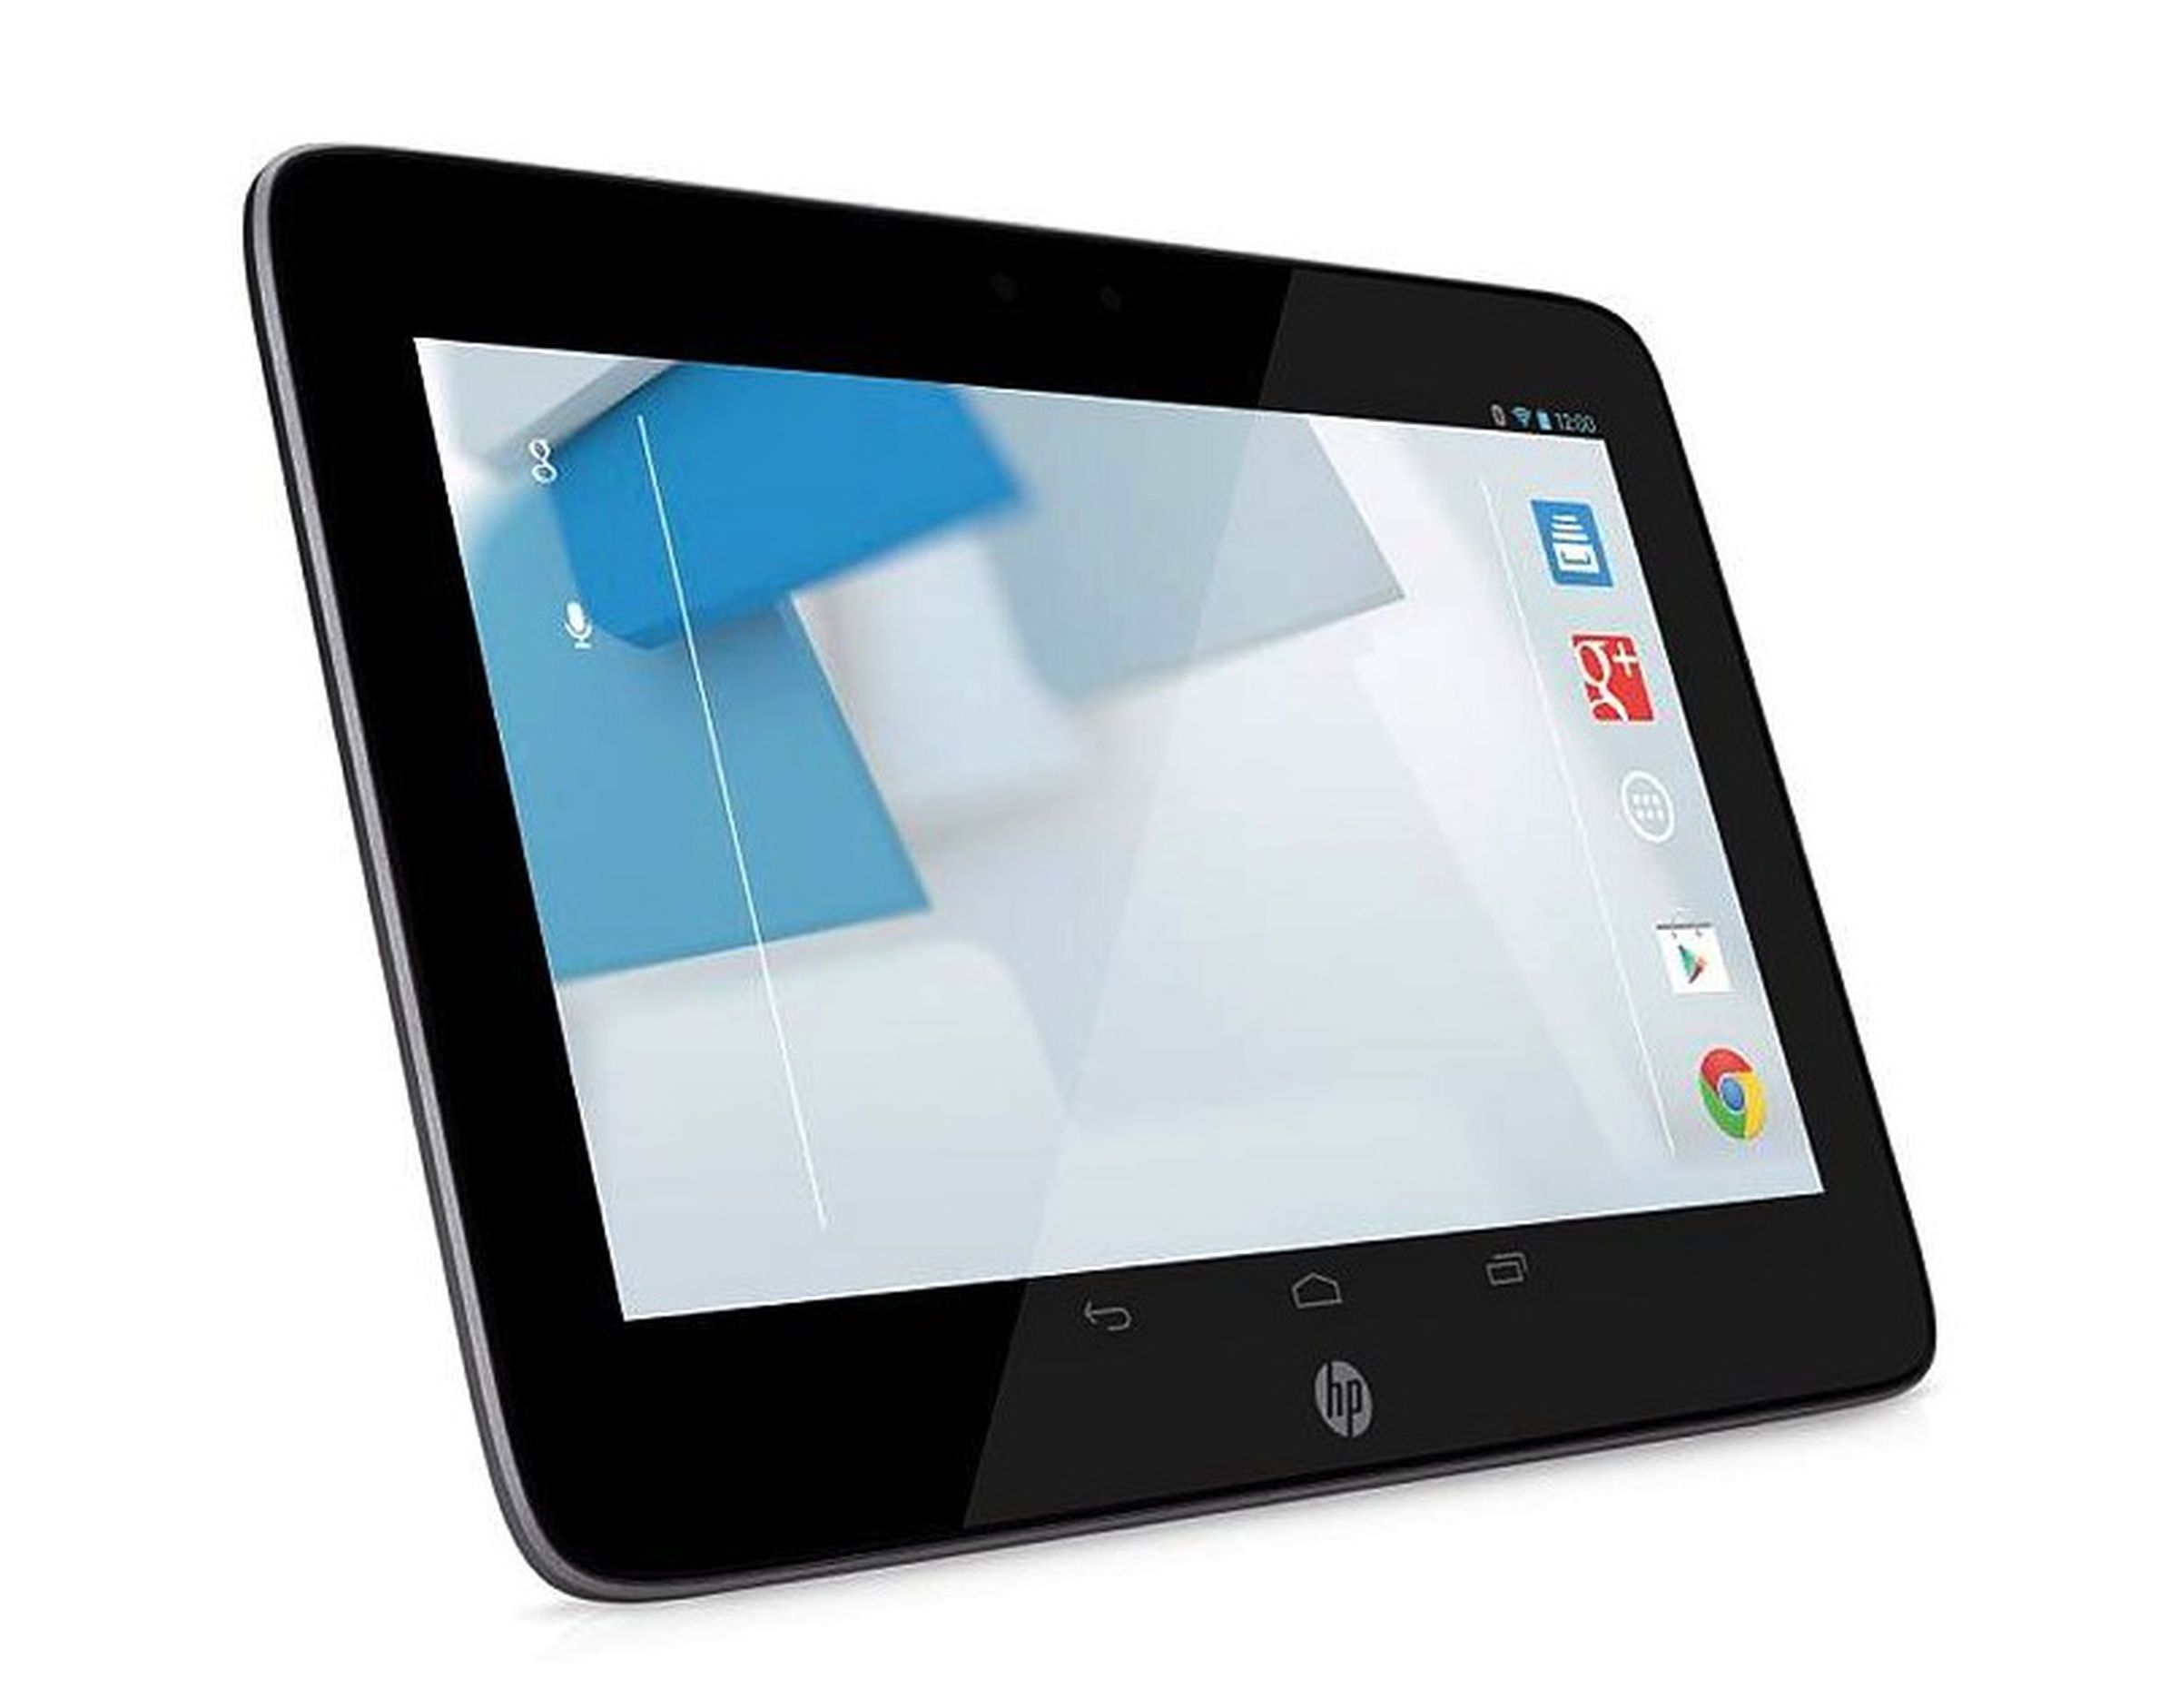 HP Slate and Omni tablet press pictures